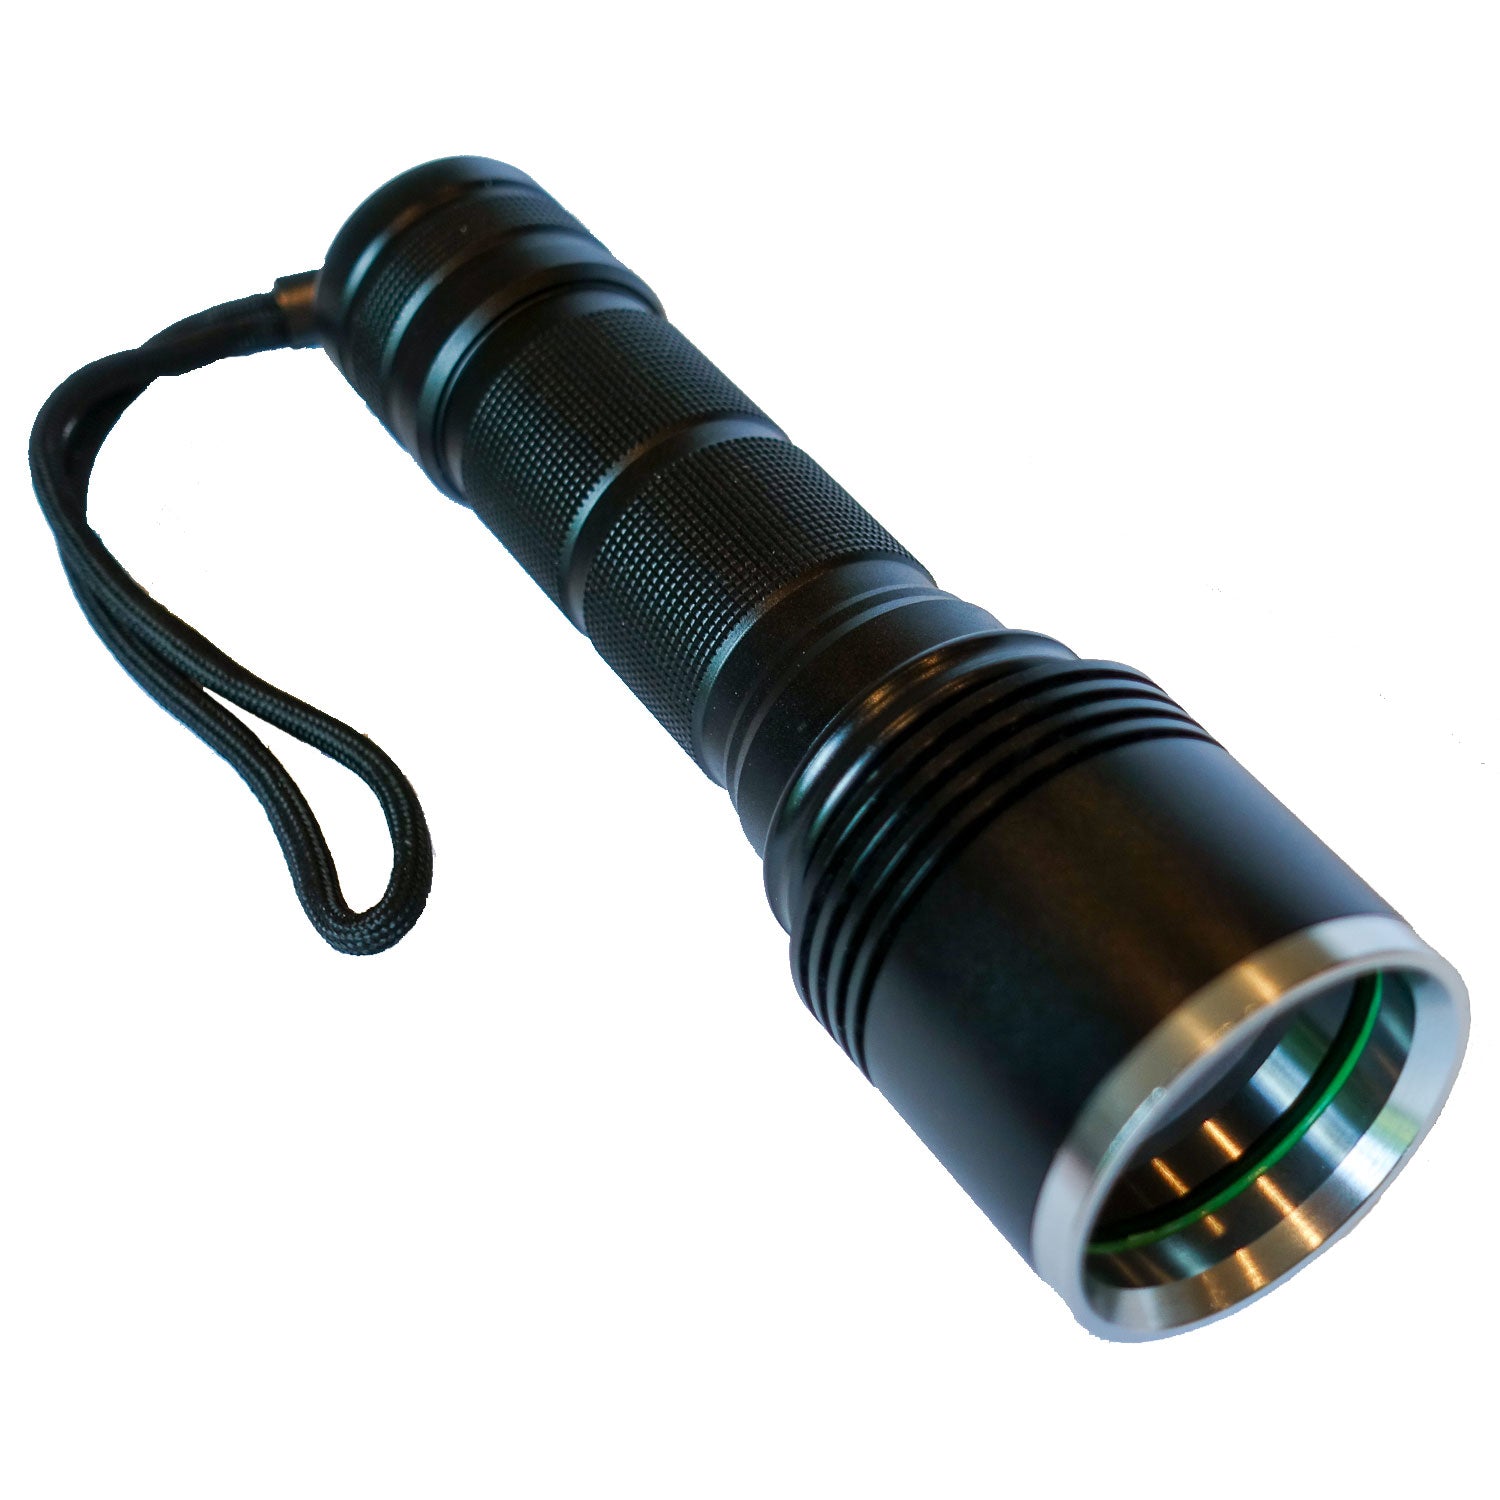 UV torch 15W + 26650 battery + charger